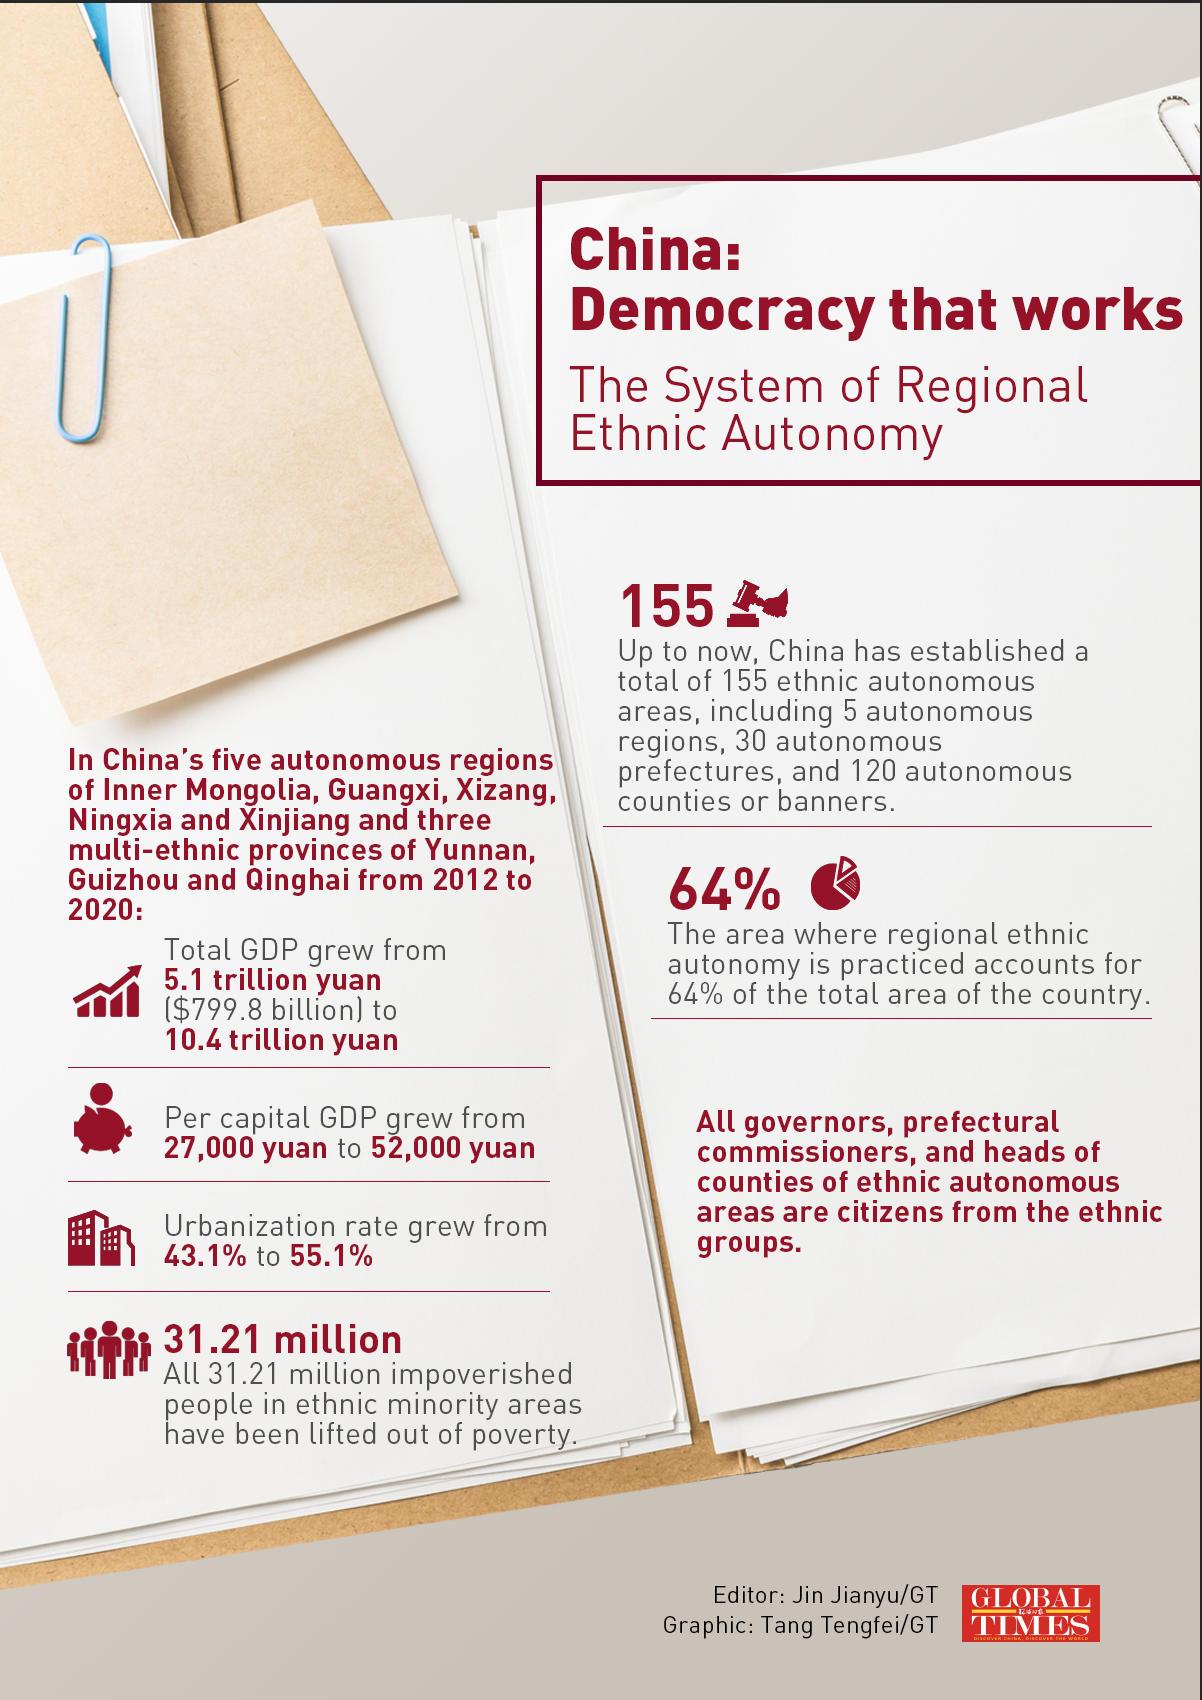 China: Democracy that works - The System of Regional Ethnic Autonomy Editor: Jin Jianyu/GT Graphic: Tang Tengfei/GT